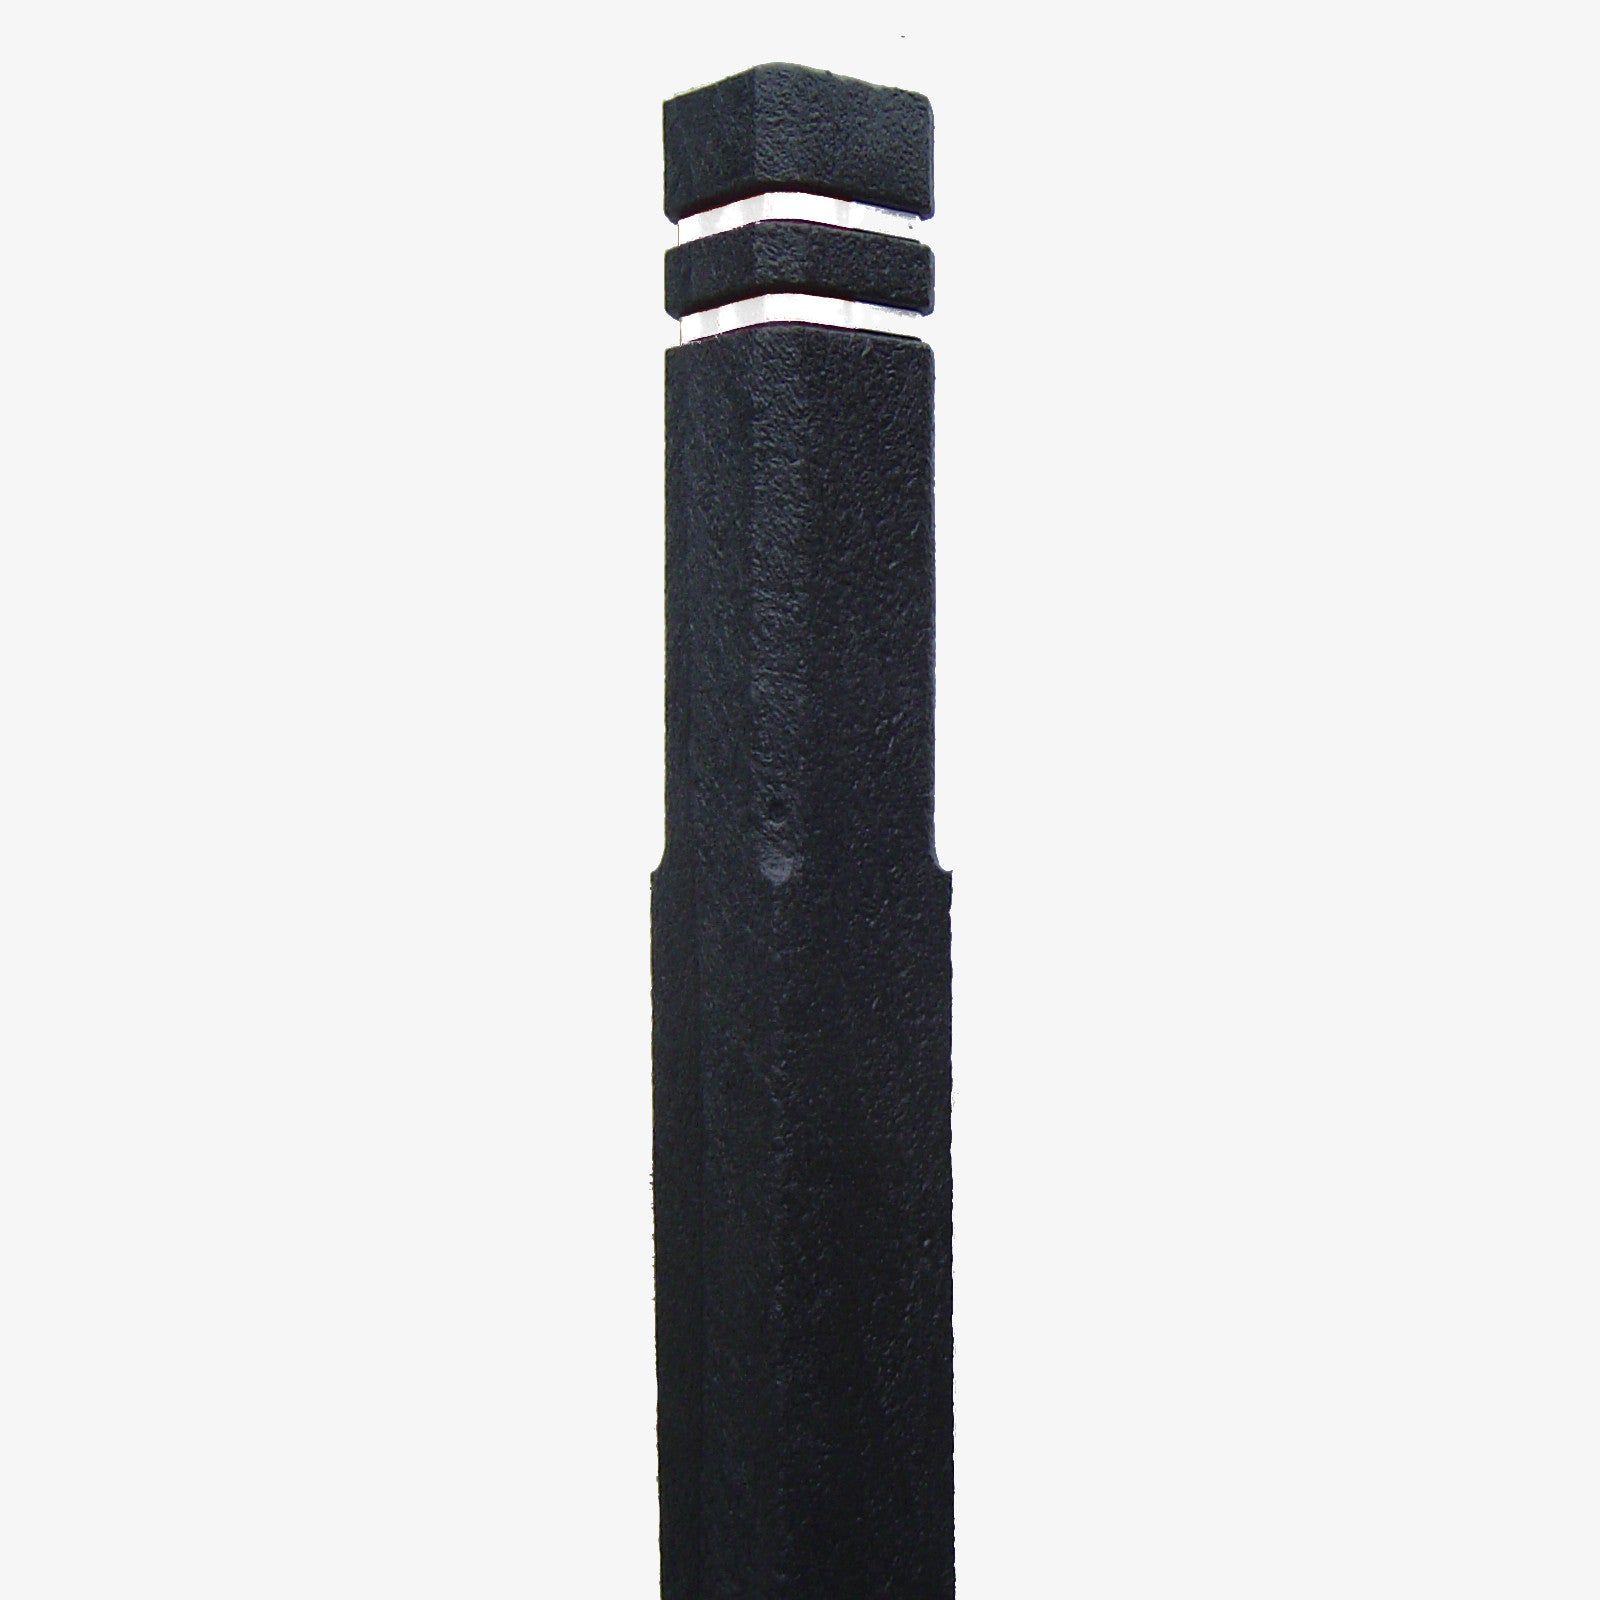 Square White Banded Recycled Plastic Bollard , Manticore Lumber Black